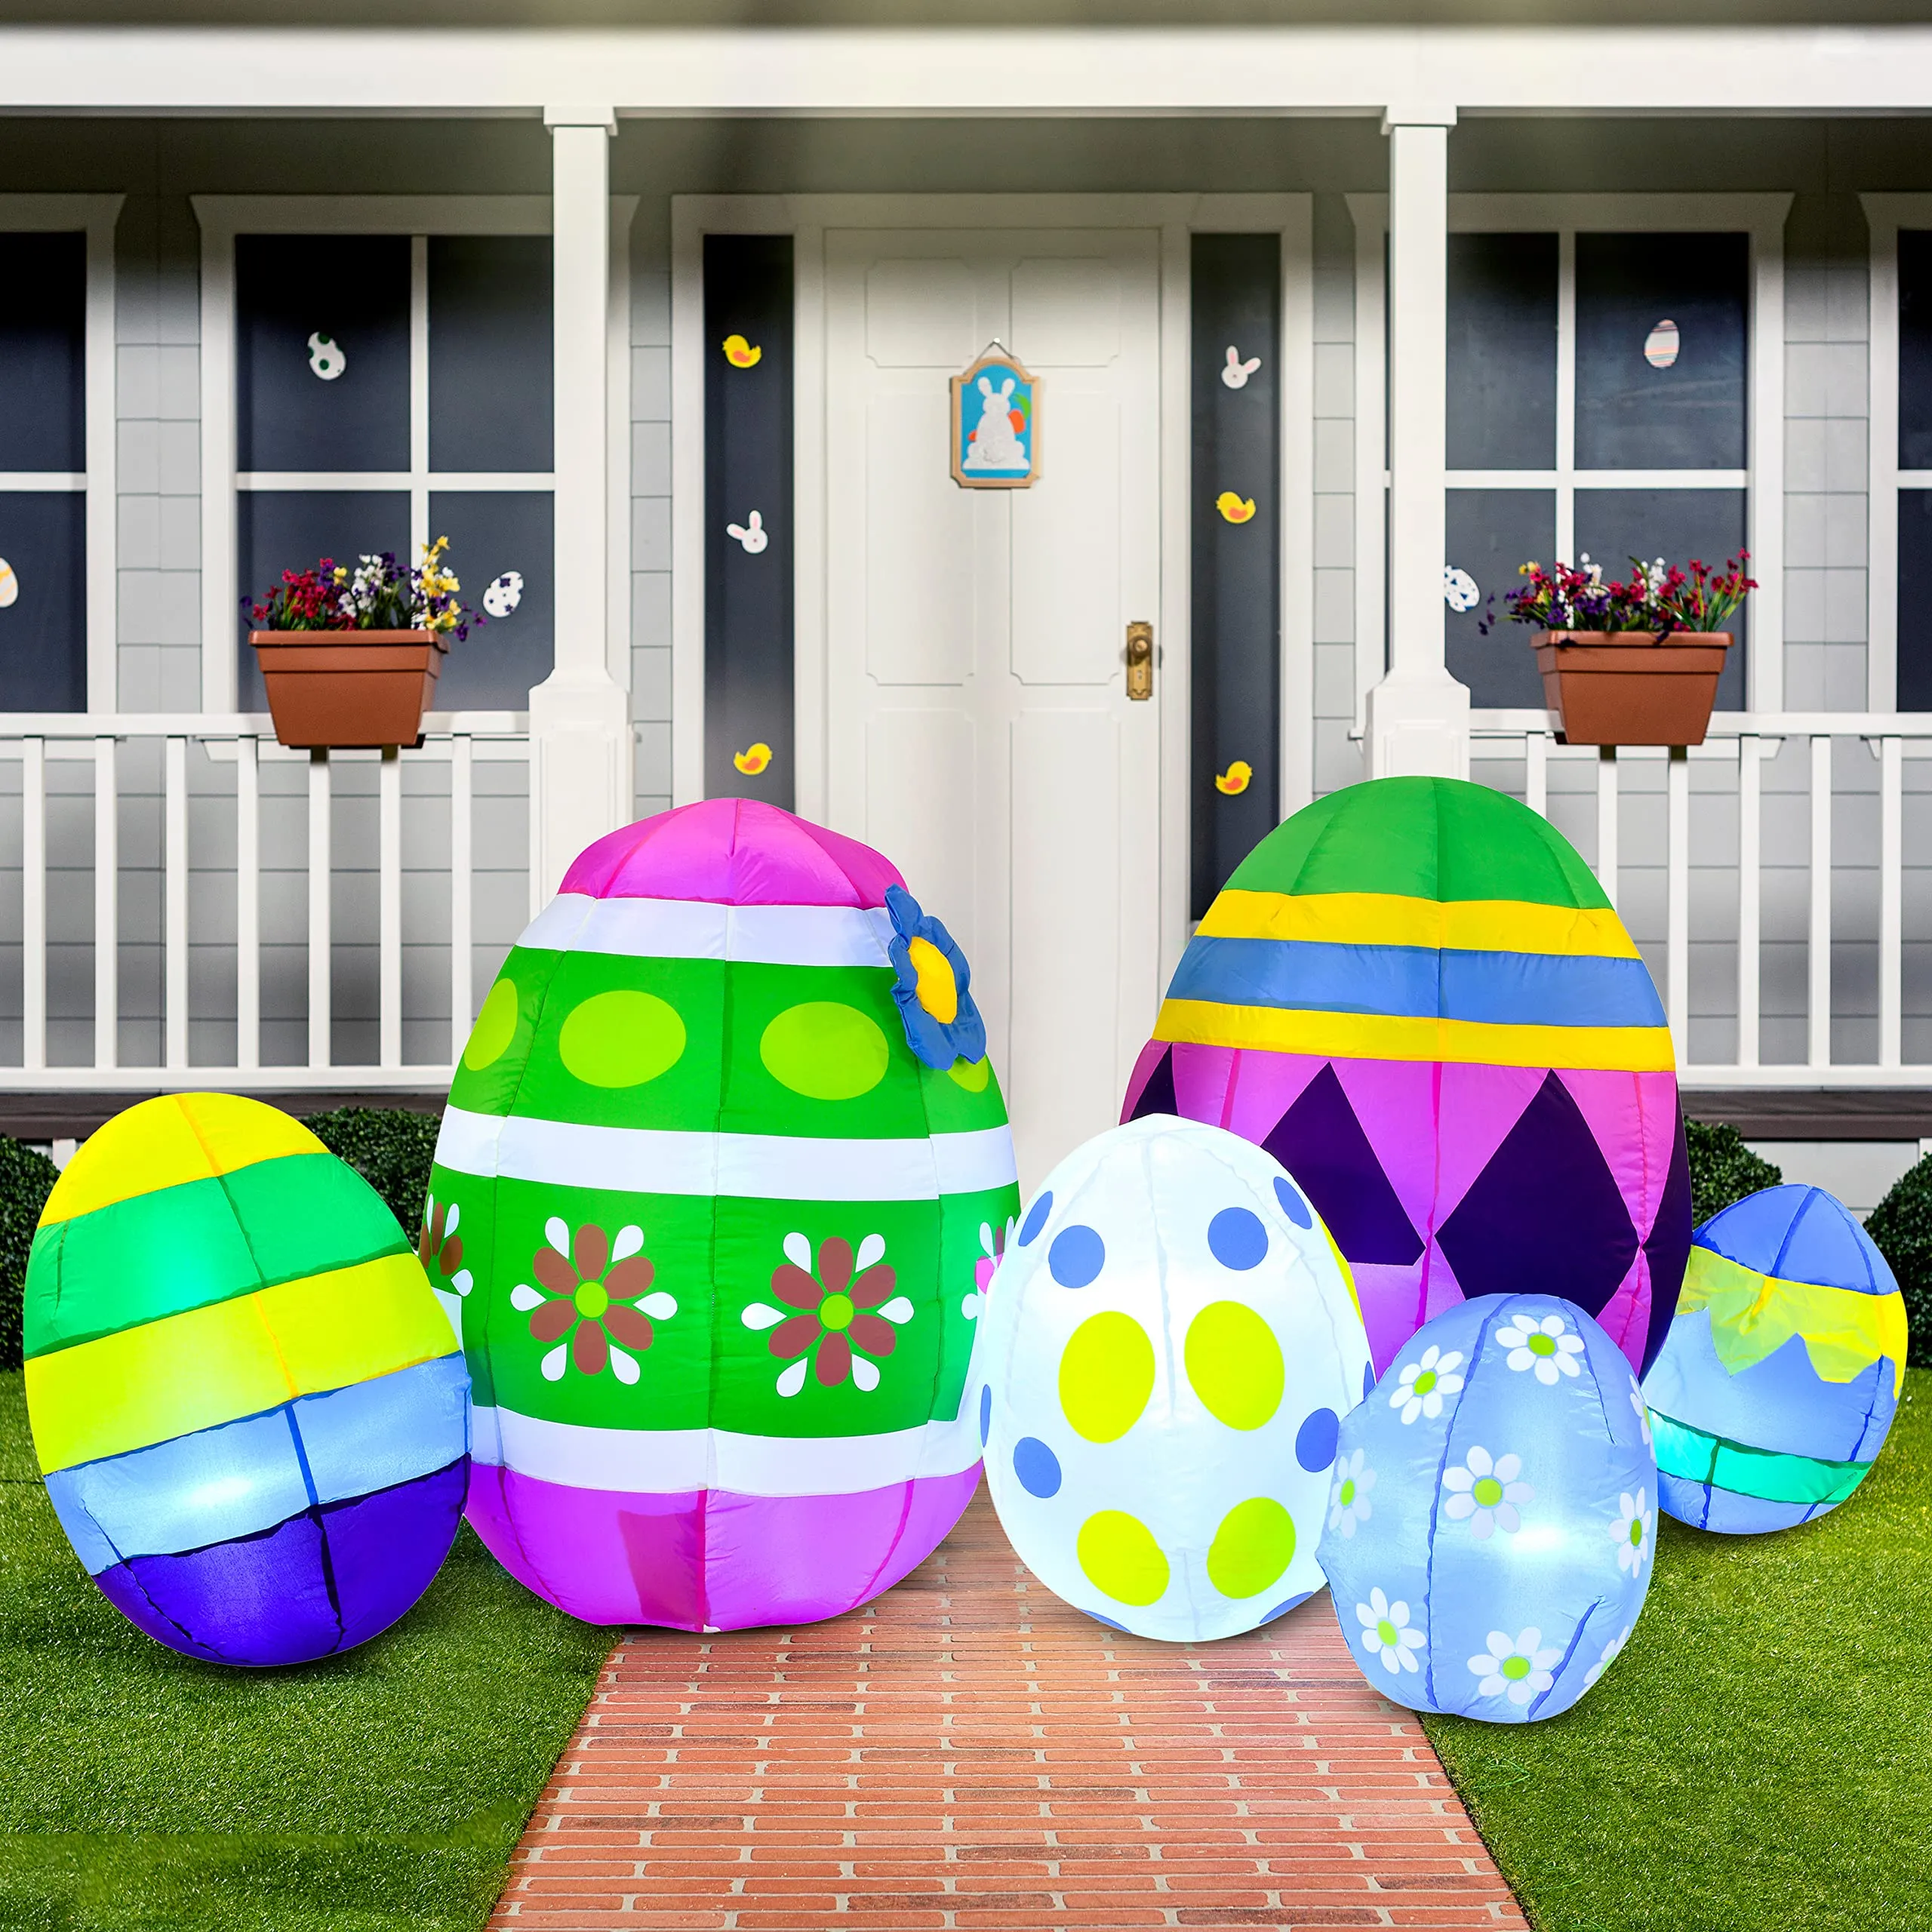 You are currently viewing Are there inflatable Easter decorations specifically designed for apartments or balconies?